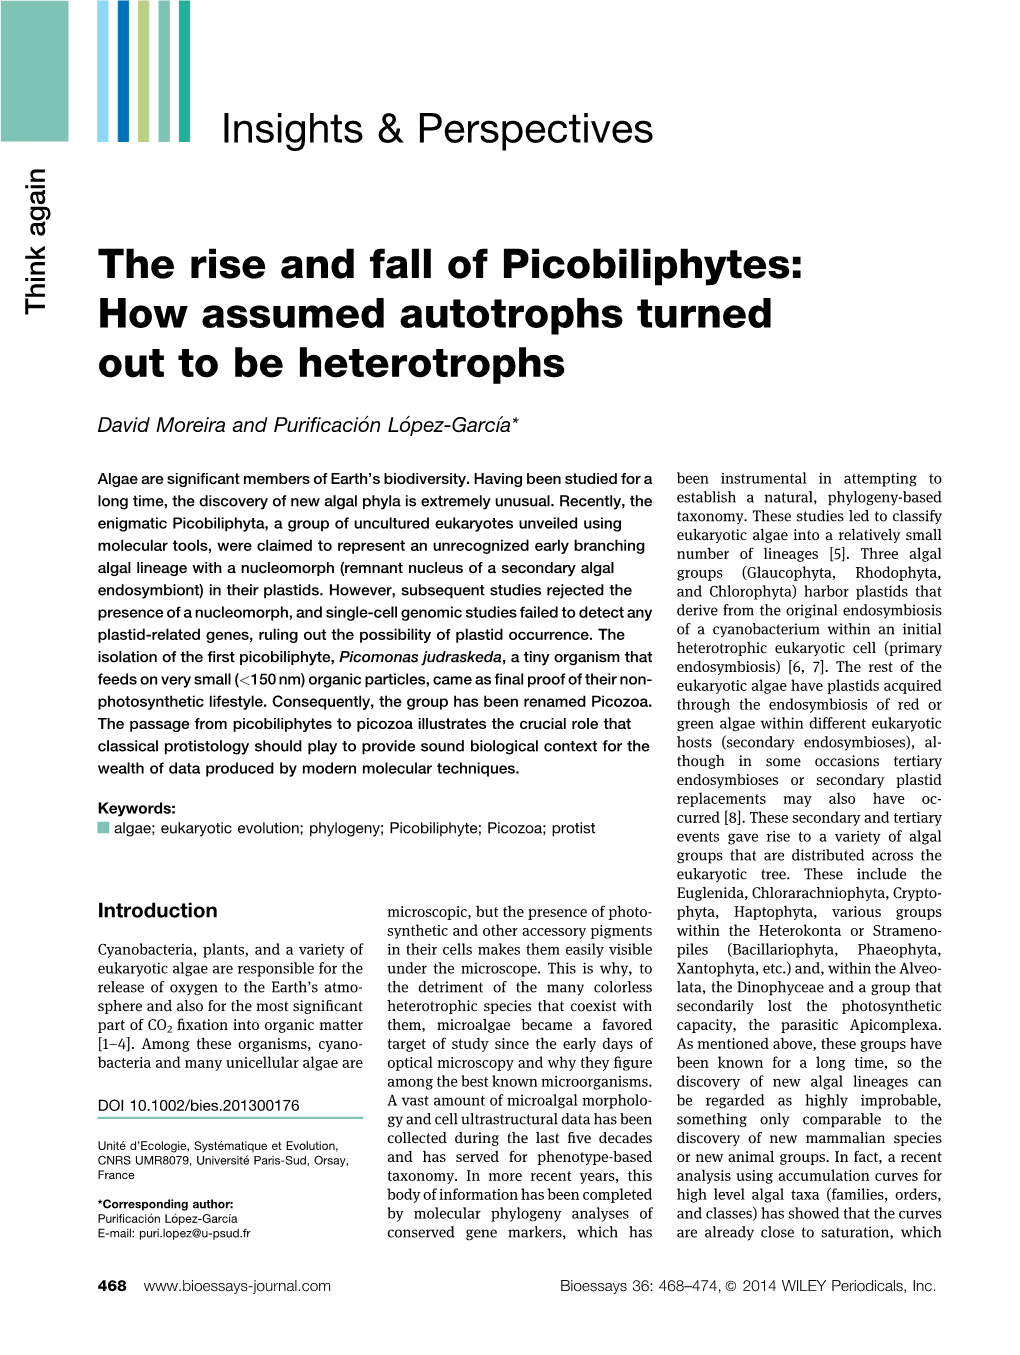 The Rise and Fall of Picobiliphytes